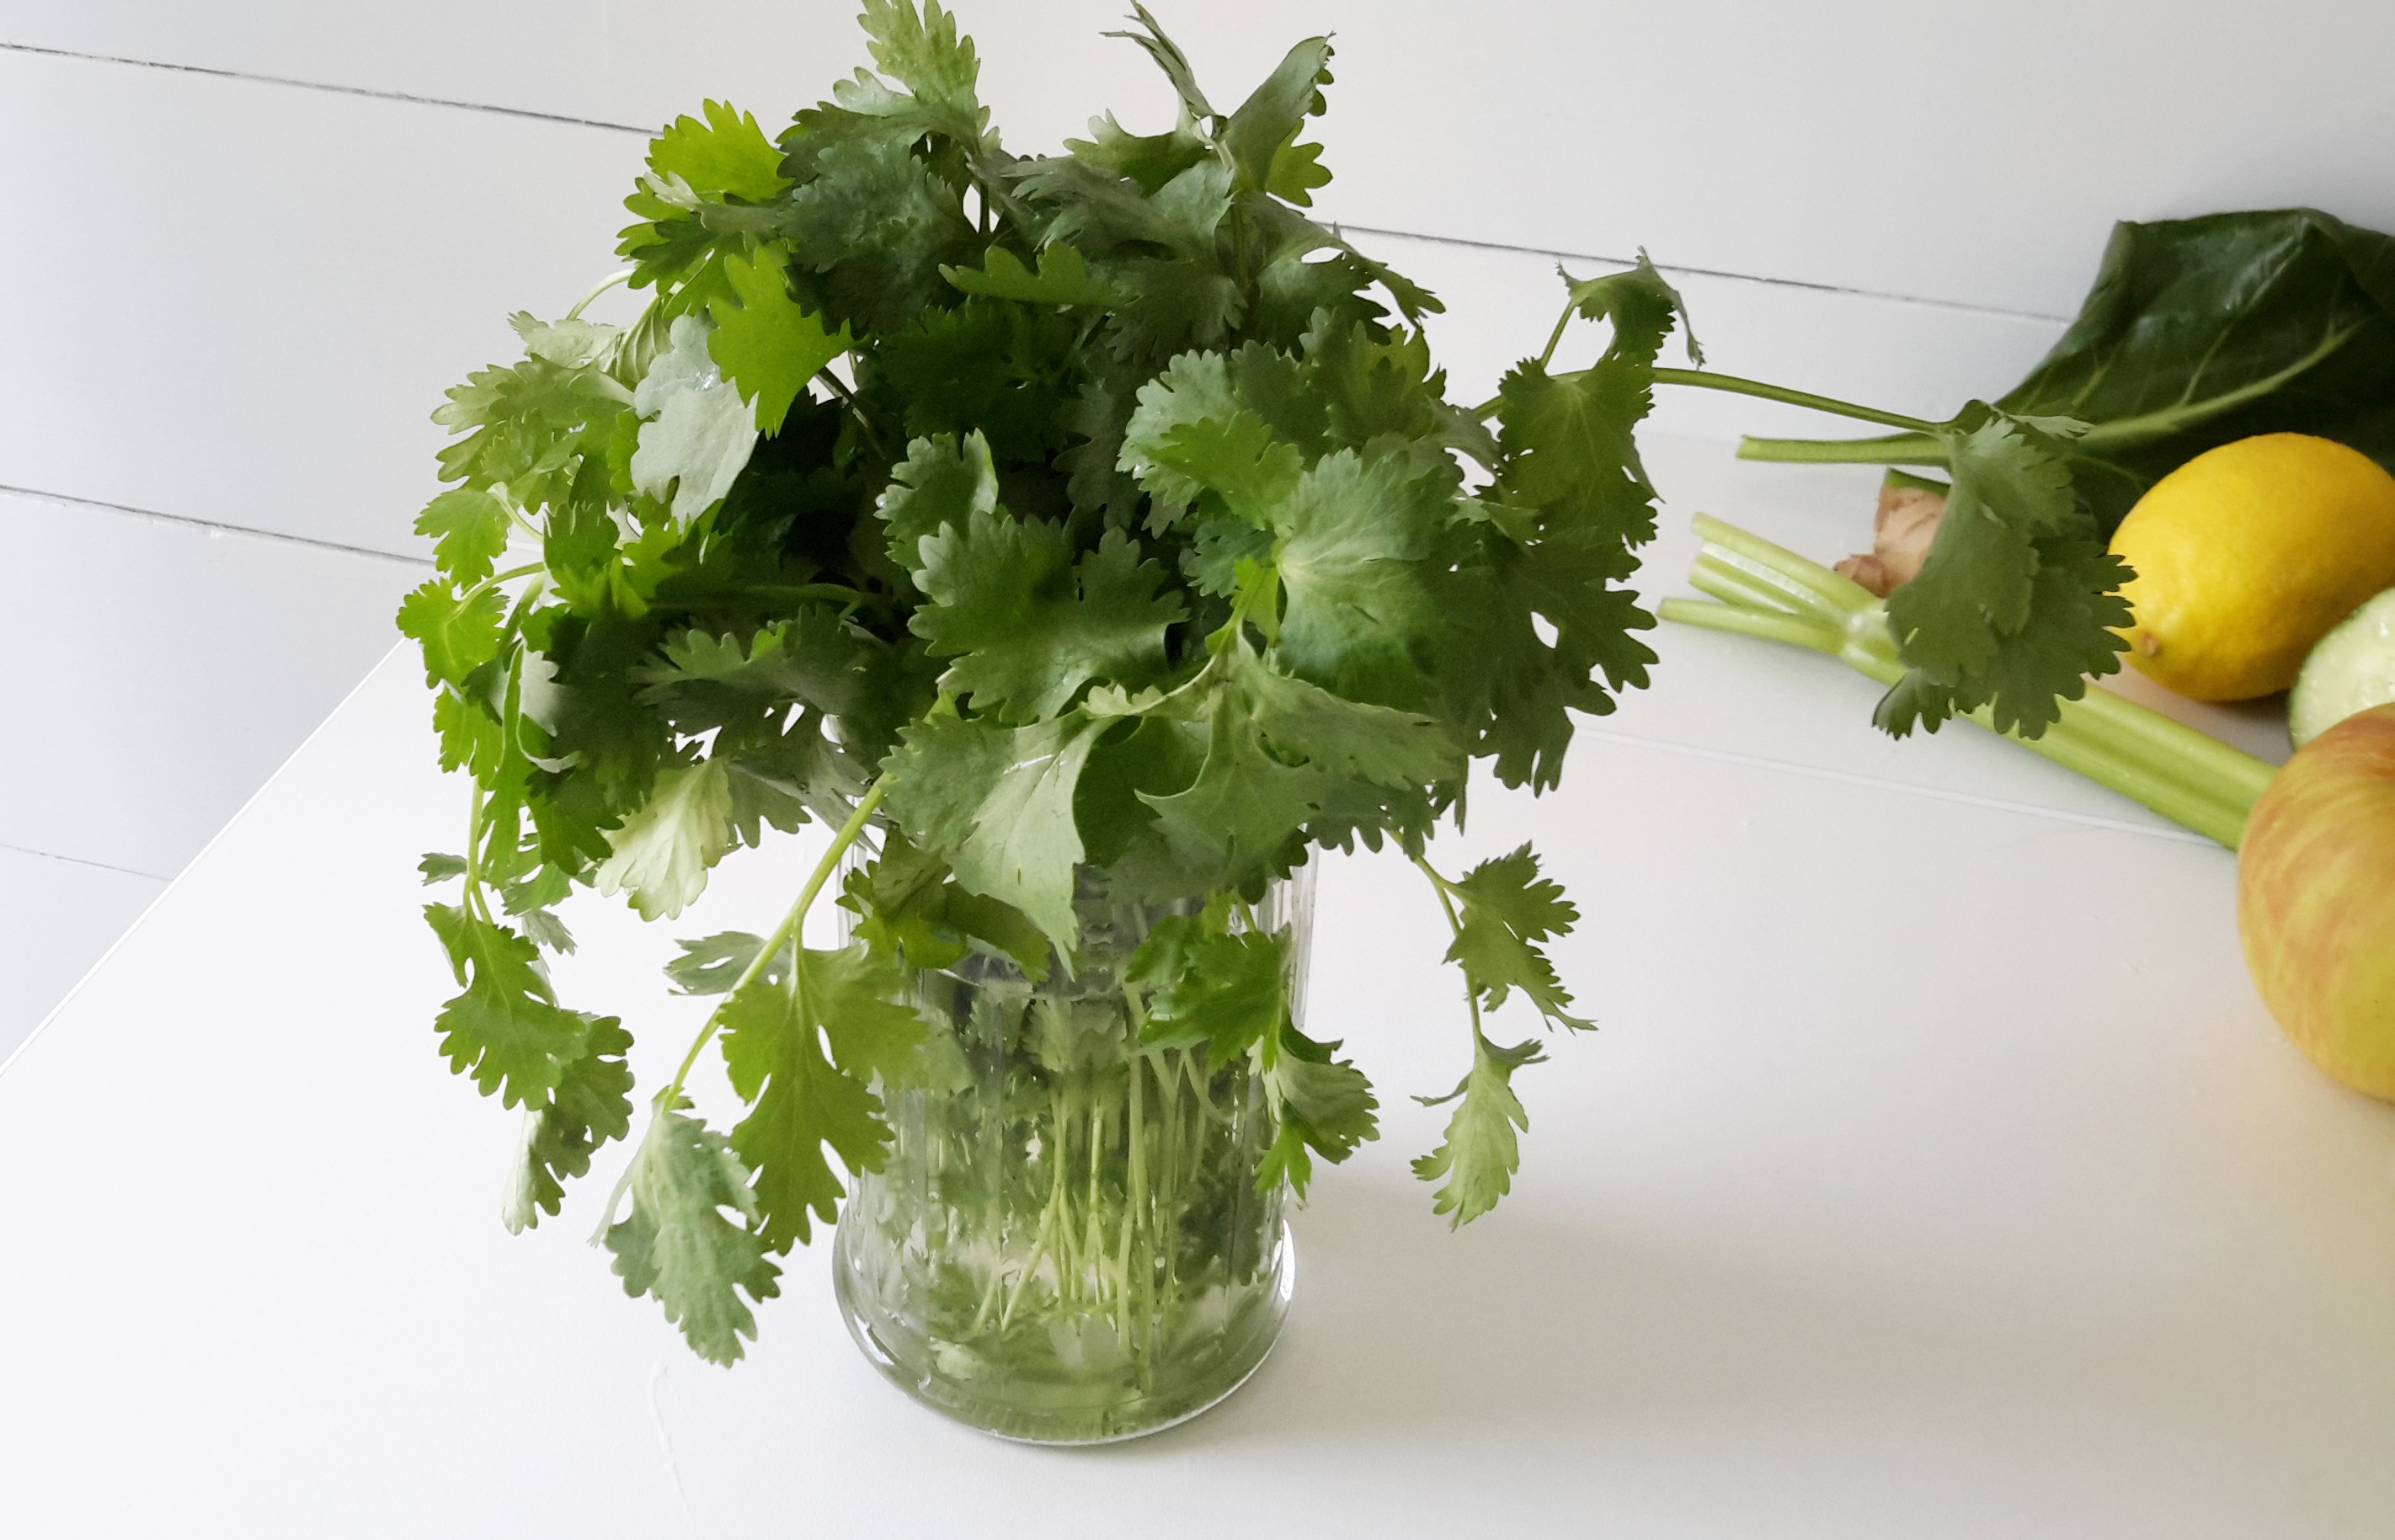 Cilantro: The Benefits, Uses and How To Keep It Fresh - You Make it ...